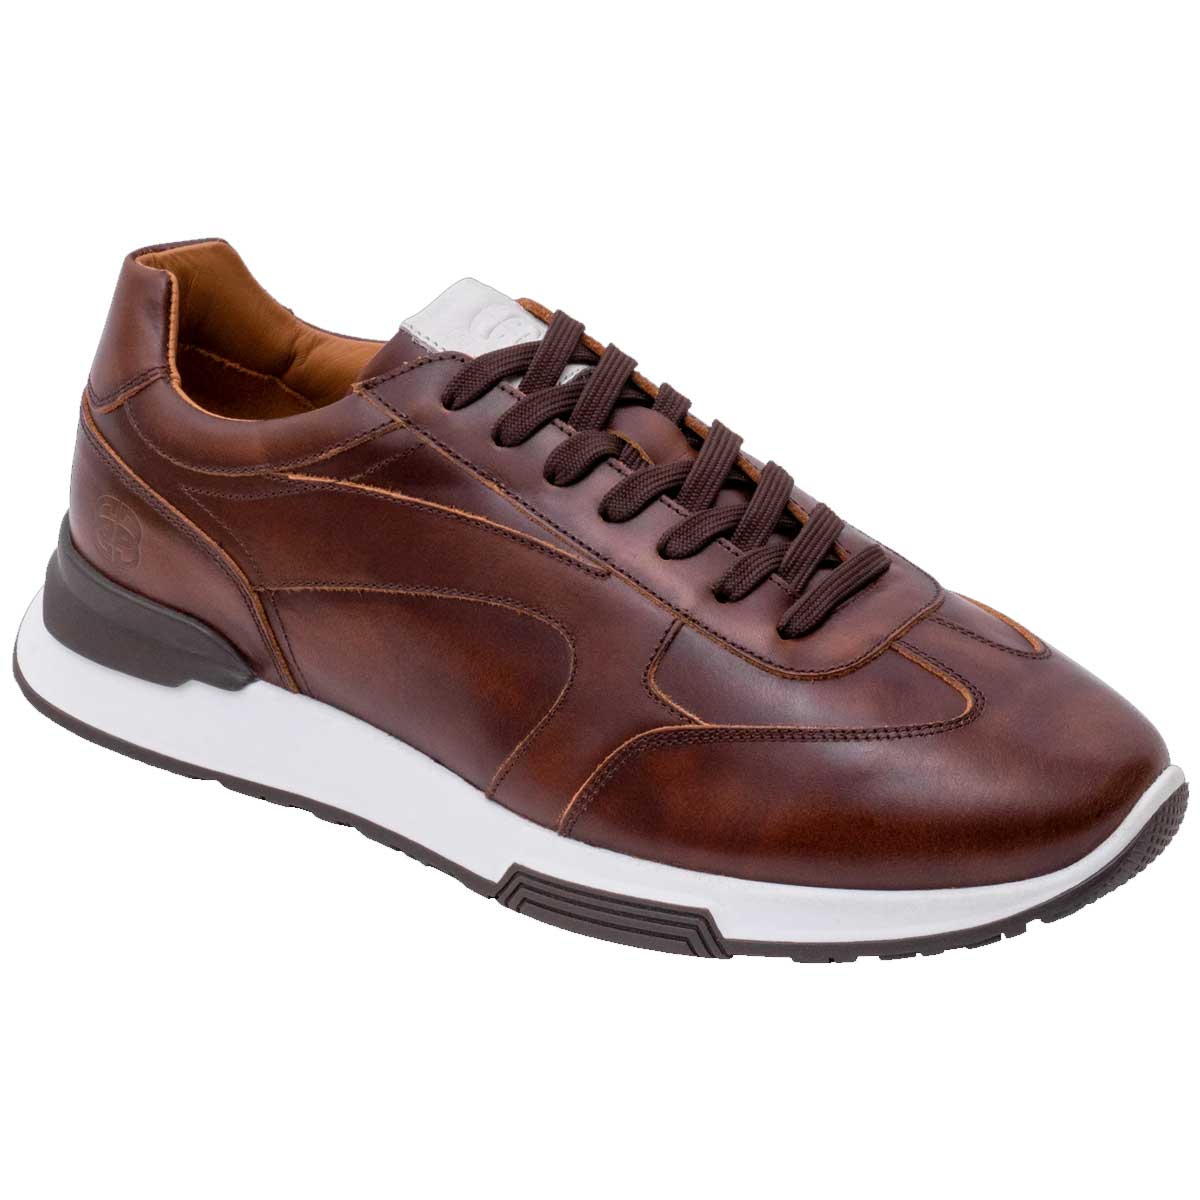 BARKER Hill Trainers - Mens - Brown Antique